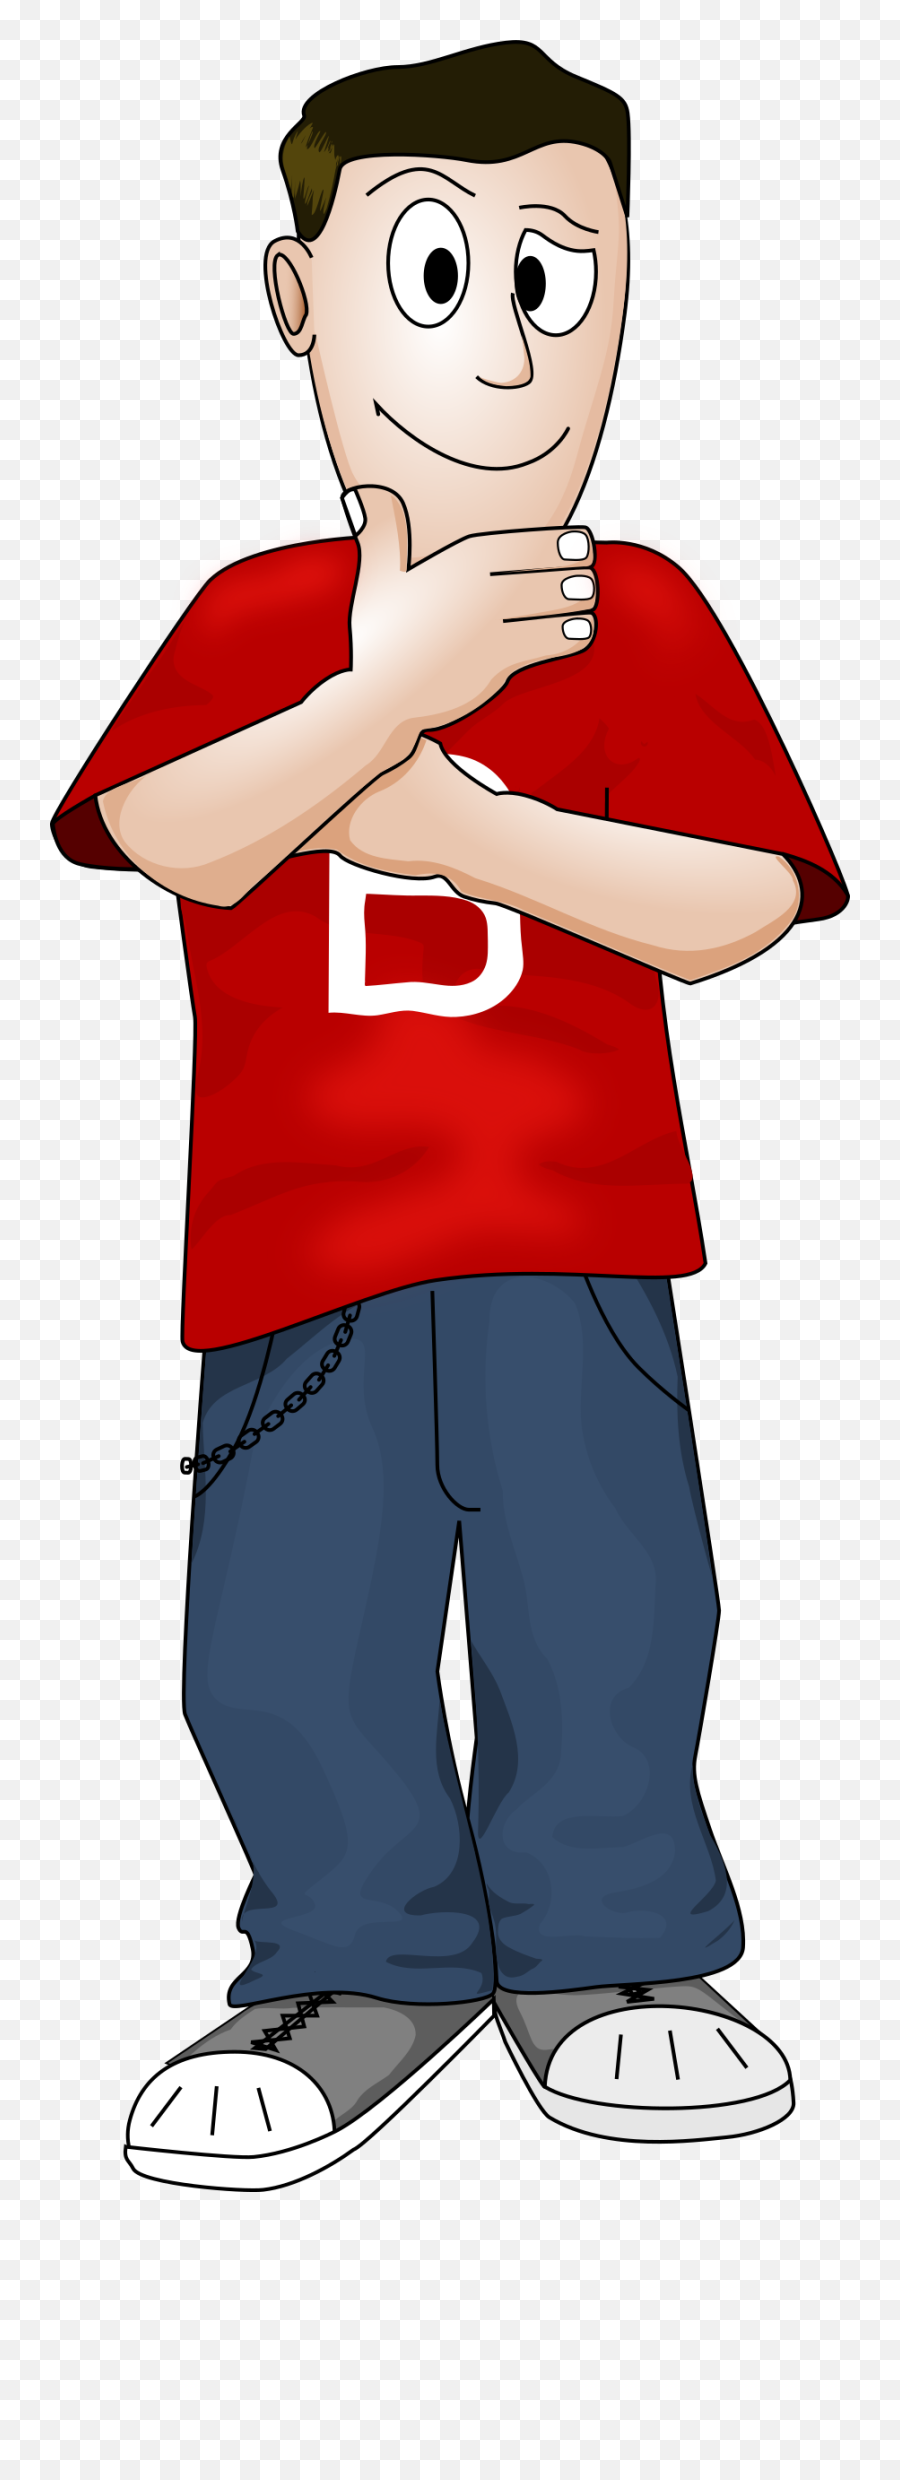 Student Clipart Png Picture 528688 Boy Thinking - Dark Skin Boy Cartoon,Student Clipart Png